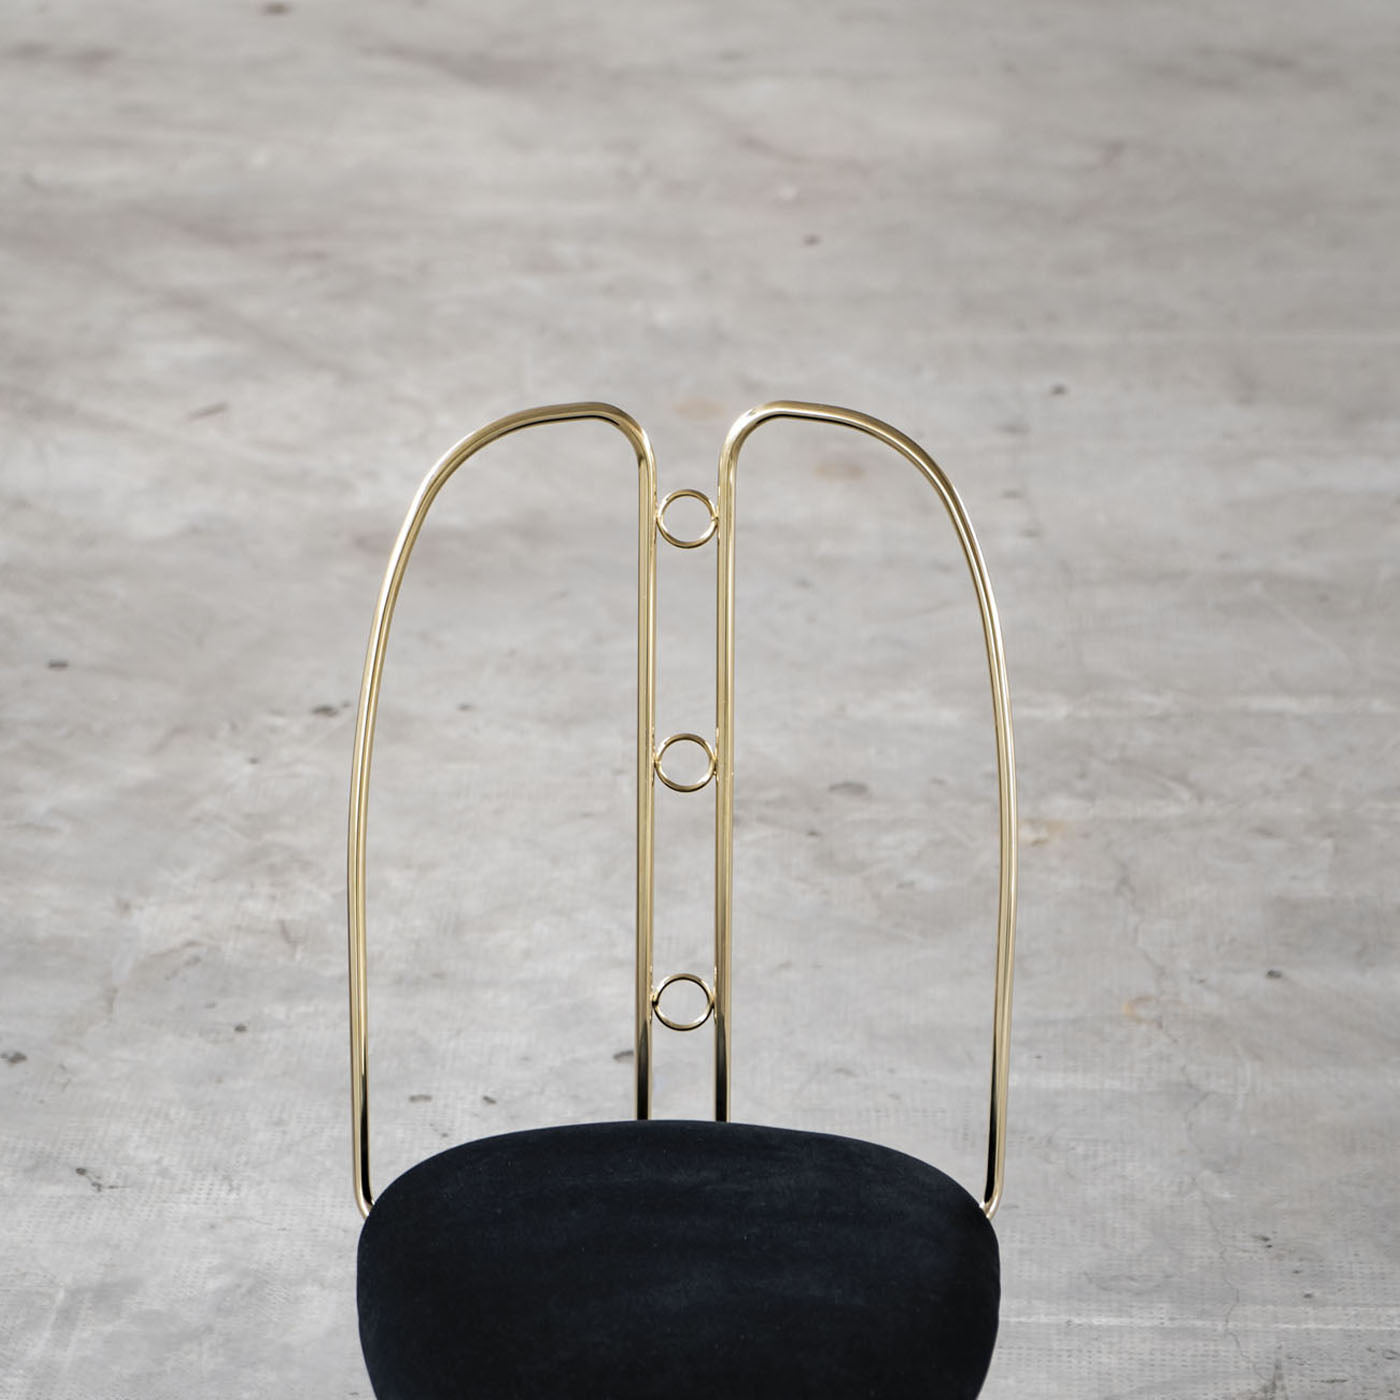 Nollie Gold and Ultrablack Chair - Alternative view 1